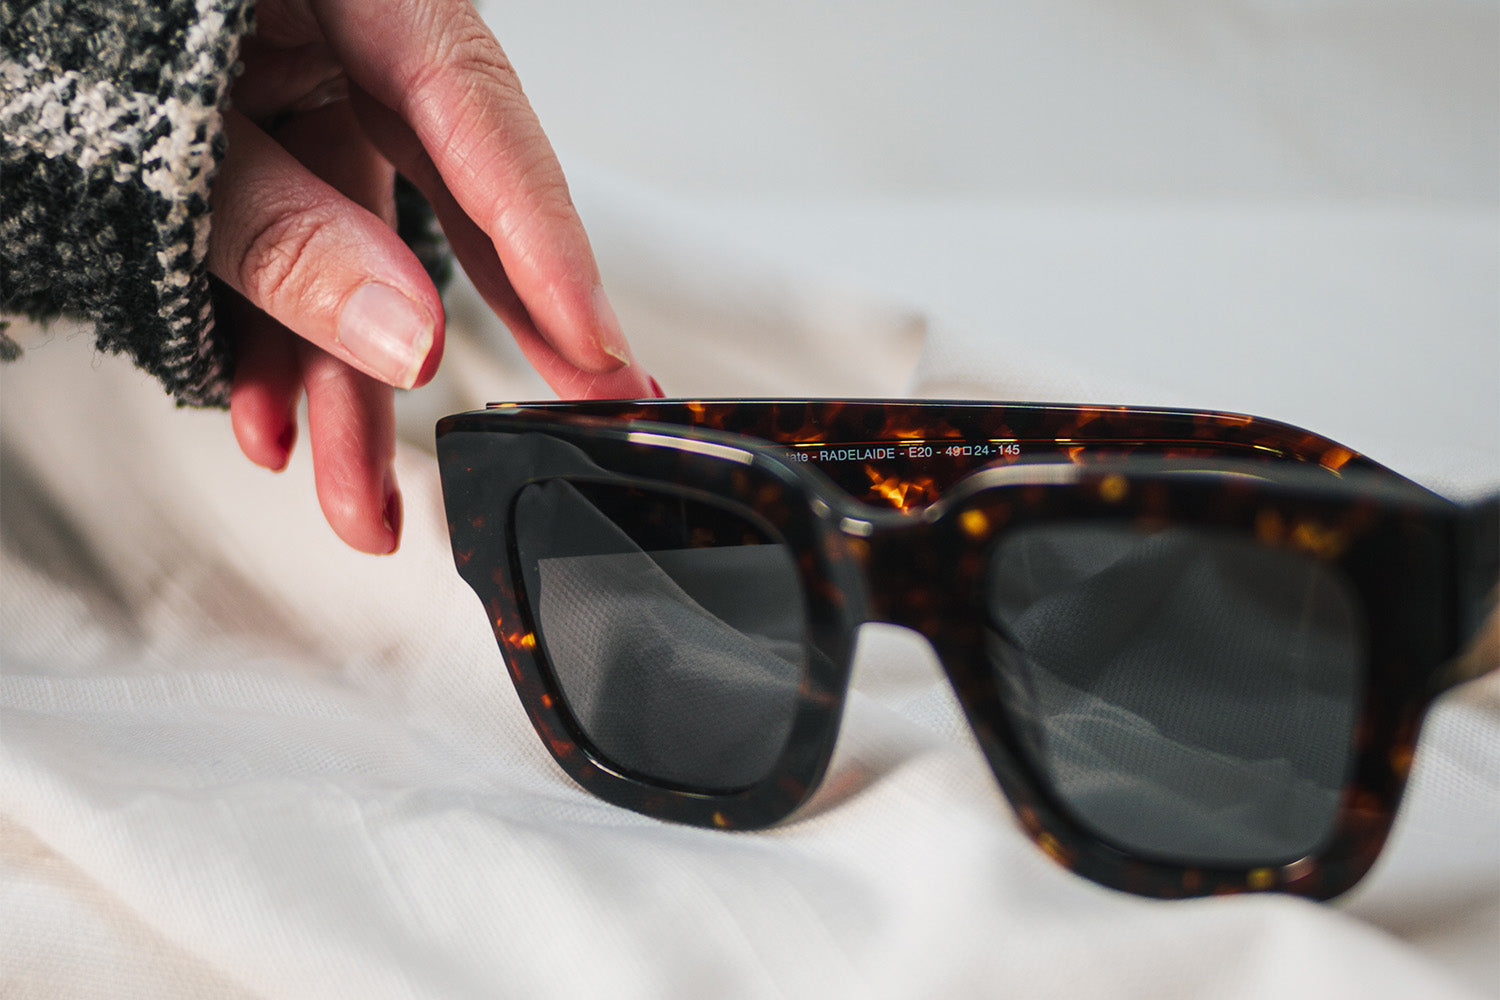 A Guide to Choosing Sunglasses That Compliment Your Style